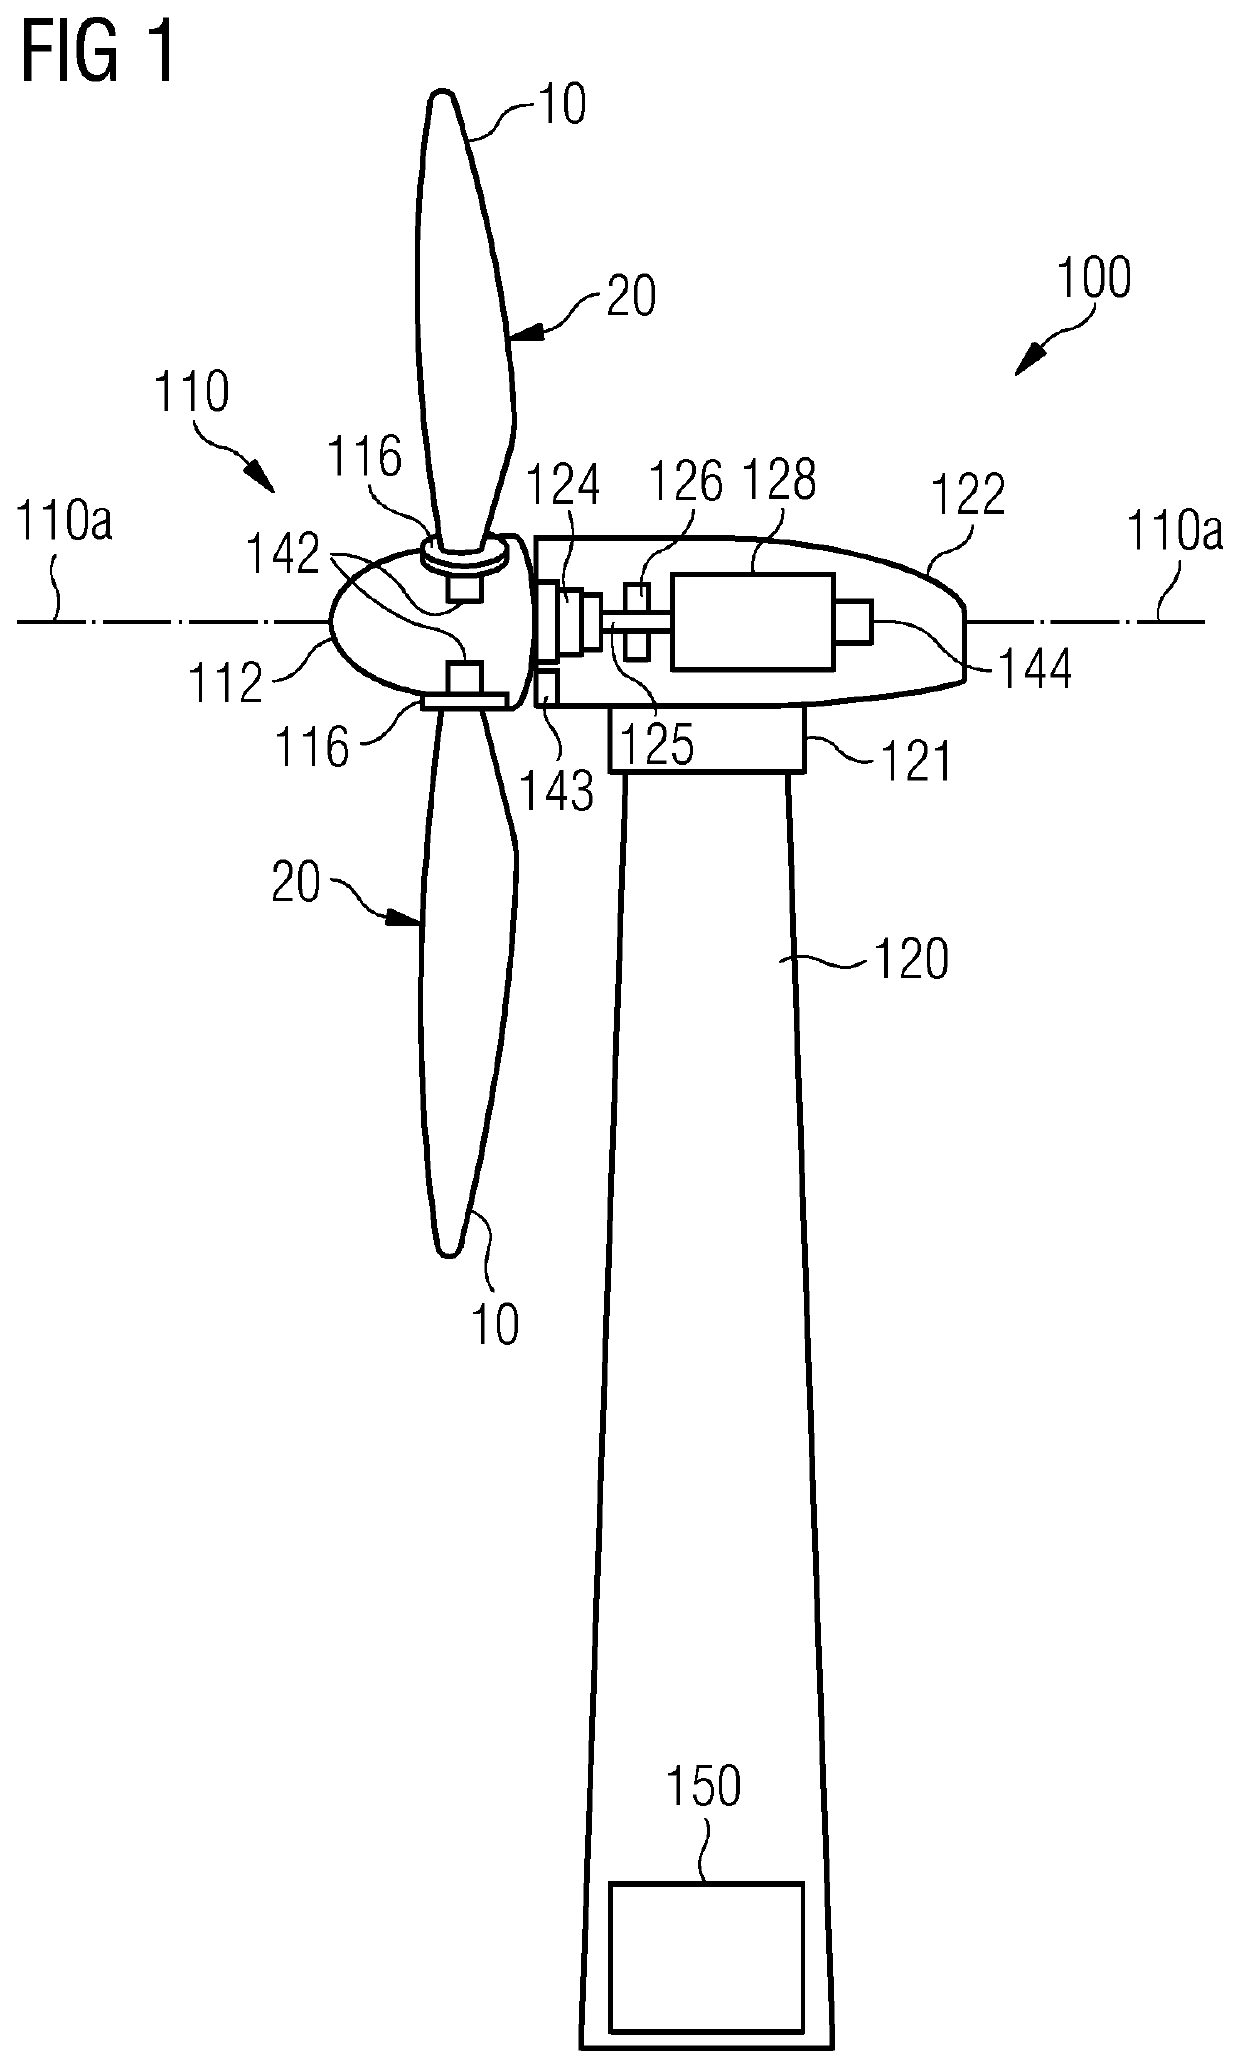 Method for on-site repairing of a wind turbine component